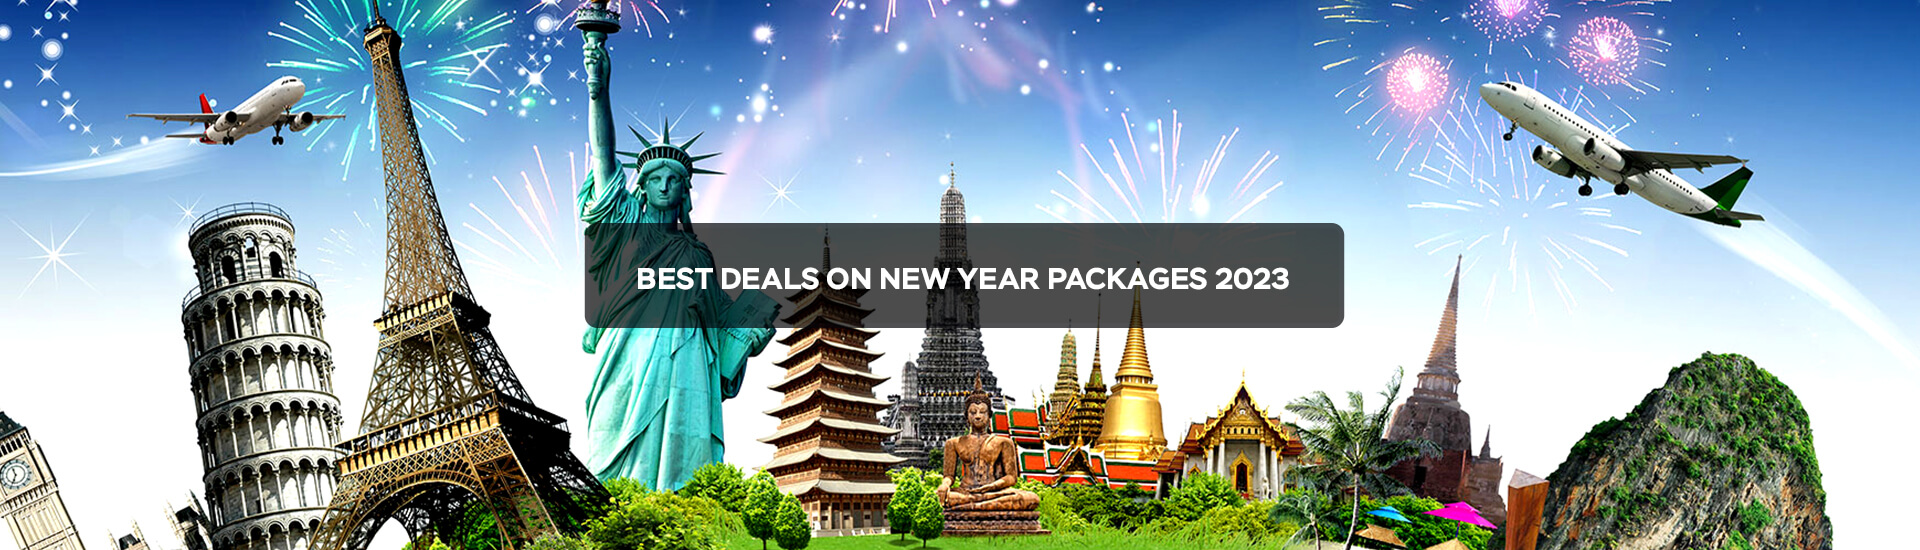 Best Deals on New Year Packages 2023